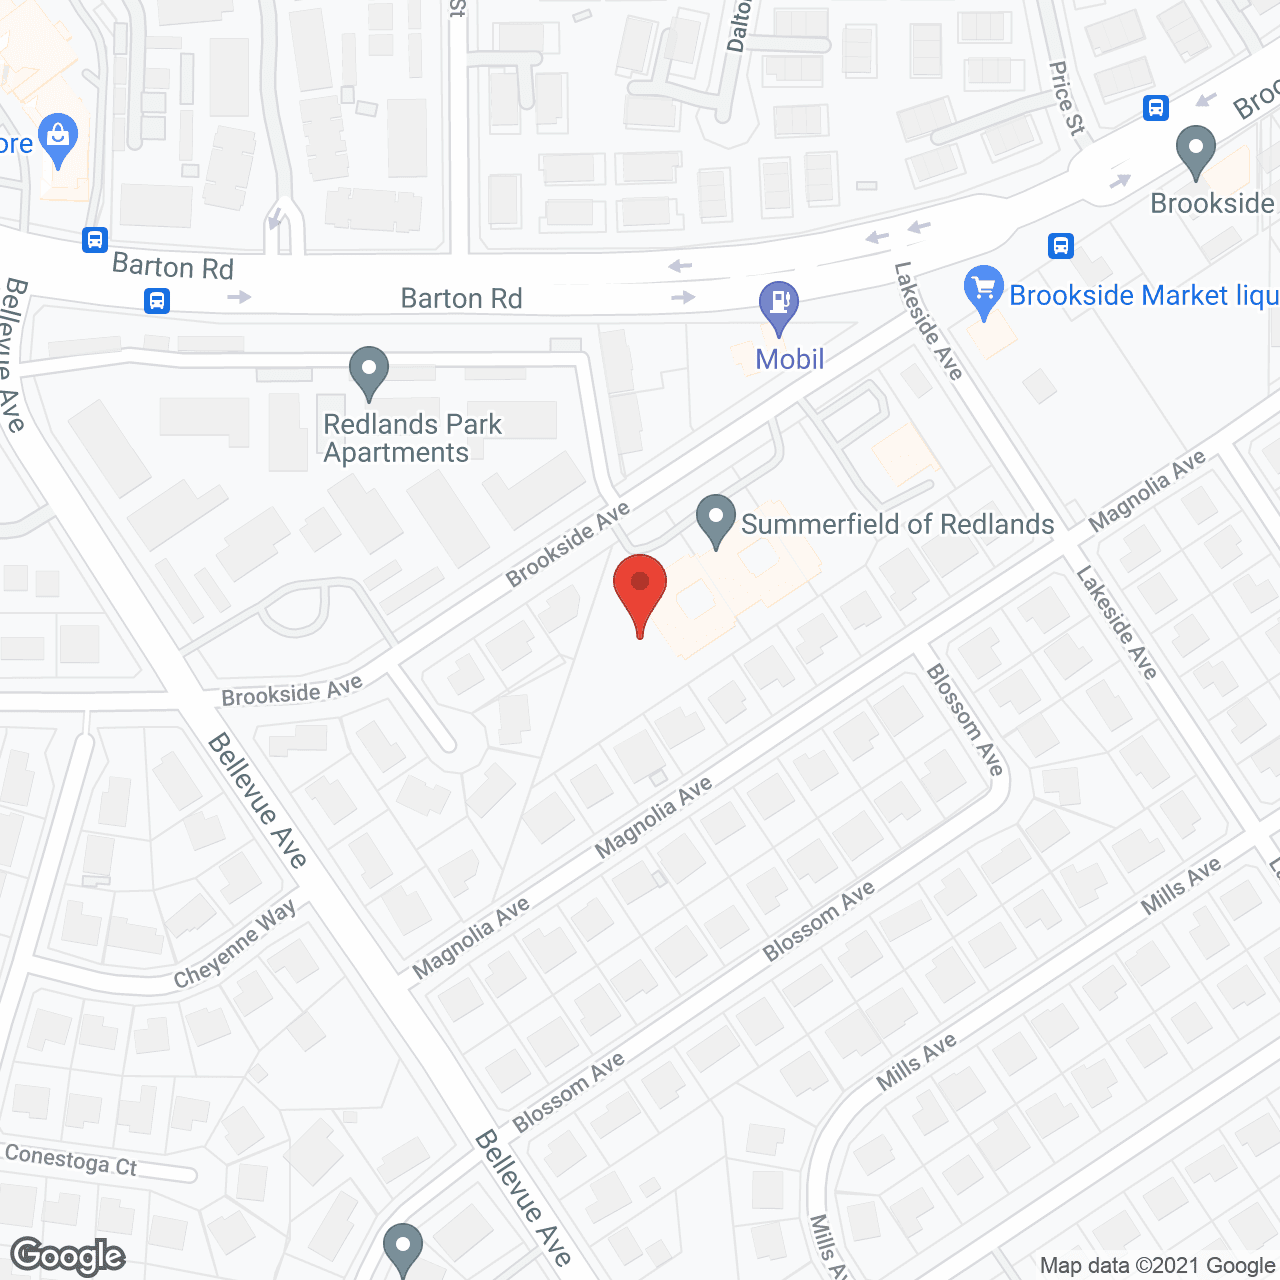 Summerfield of Redlands Memory Care in google map